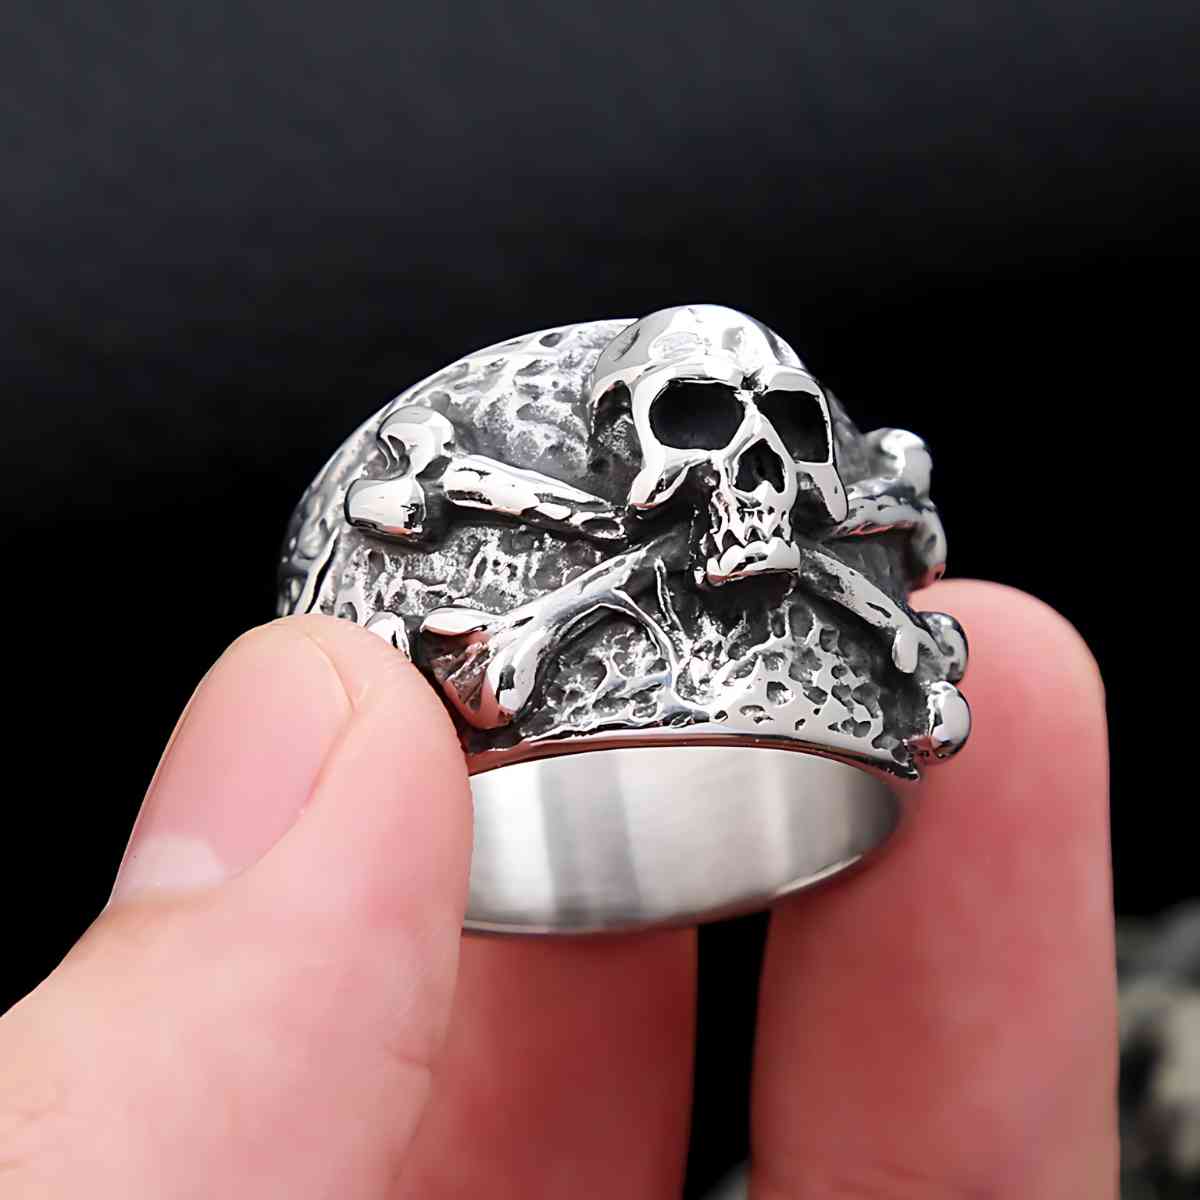 Pirate Band Ring with Textured Skull